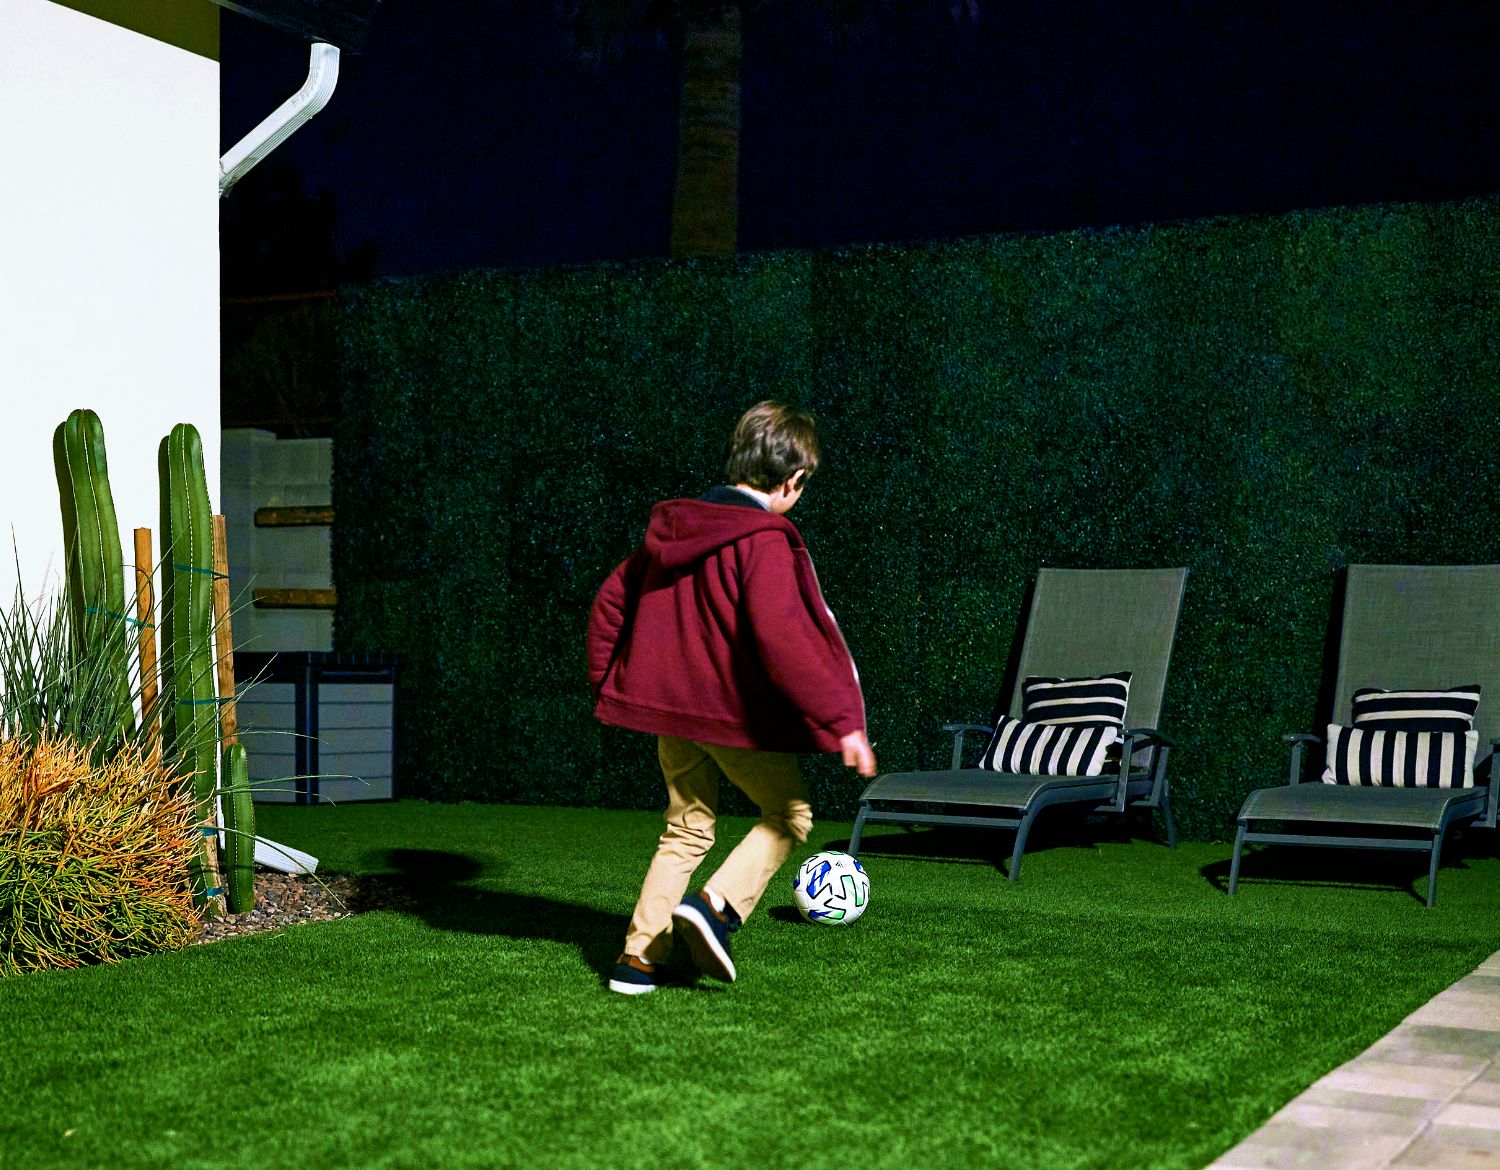 A young boy in the garden at night playing football in the garden